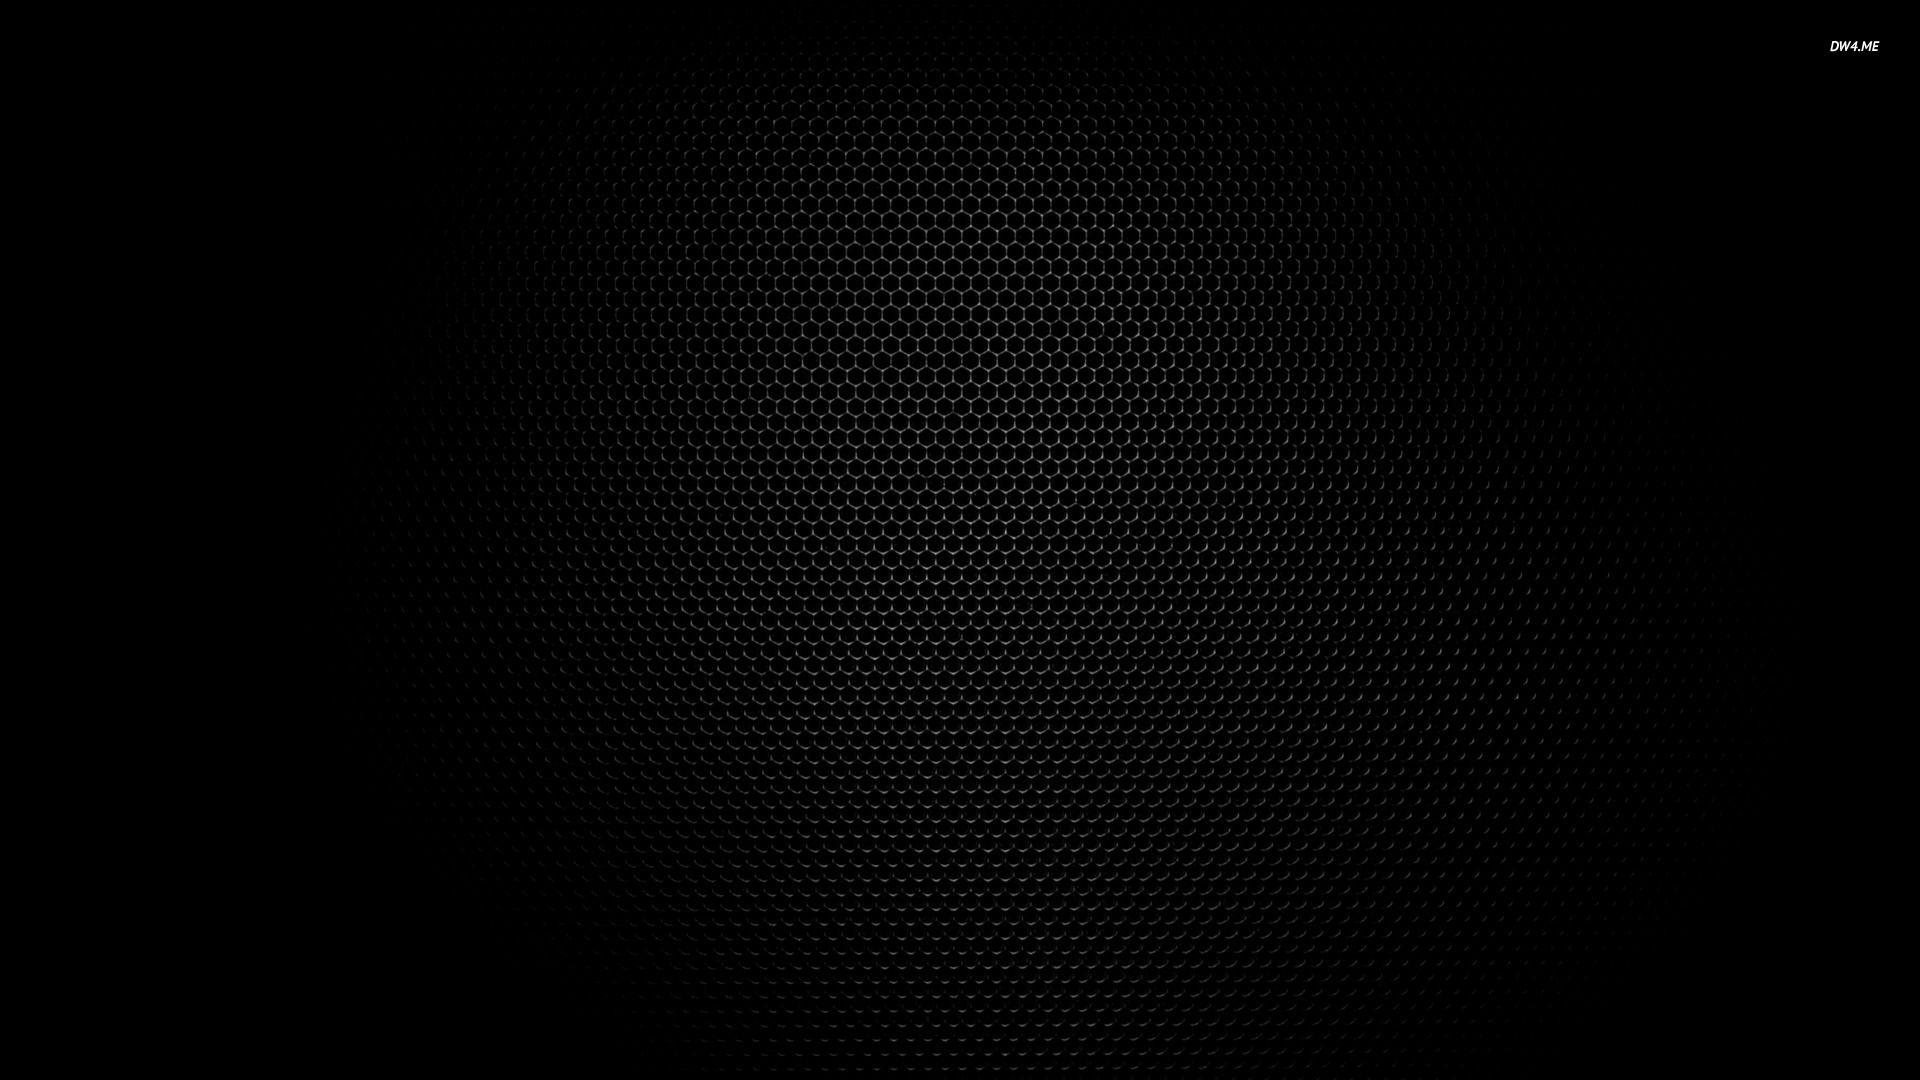 25 Excellent black screen wallpaper for desktop You Can Download It For